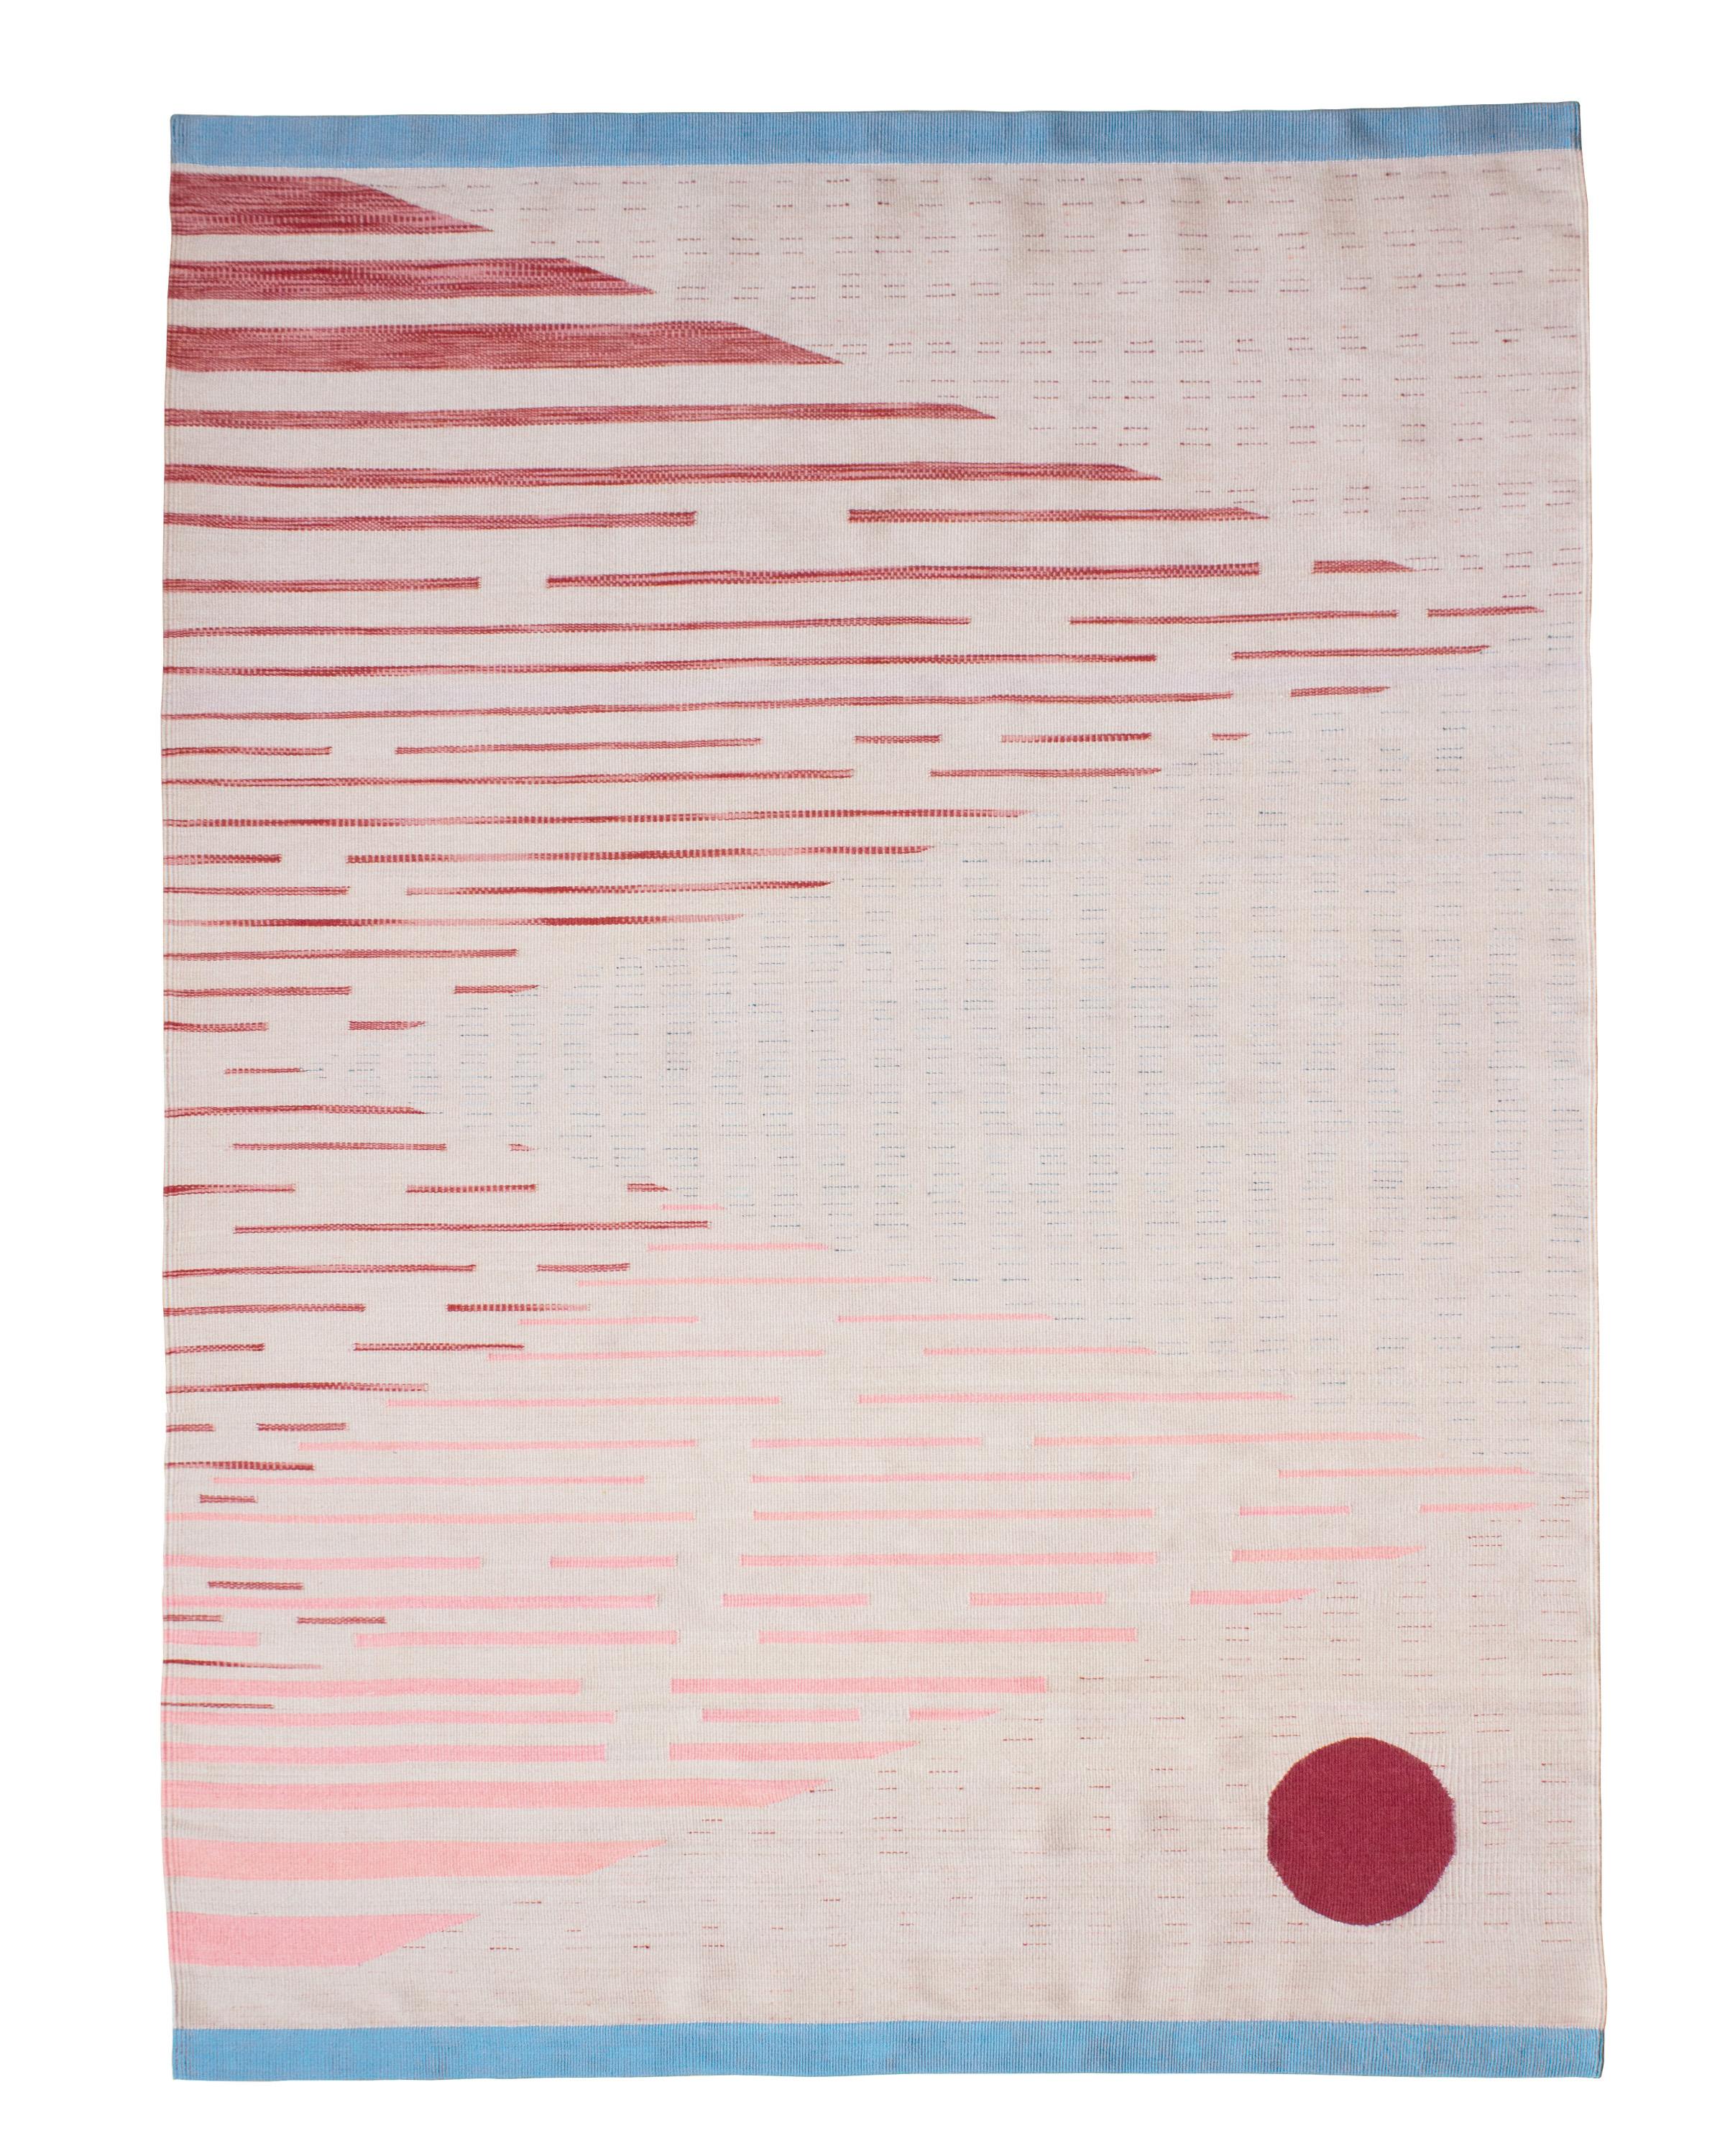 Norte 61 N03 Rug by Bi Yuu
Dimensions: D200 x 300 H cm
Material: 70% Lincoln Wool / 30% Wool-Cotton
Density: 2800 yam passes per m2.
Also Available in different dimensions. Dye: Natural.

She founded Bi Yuu with the vision that the work would